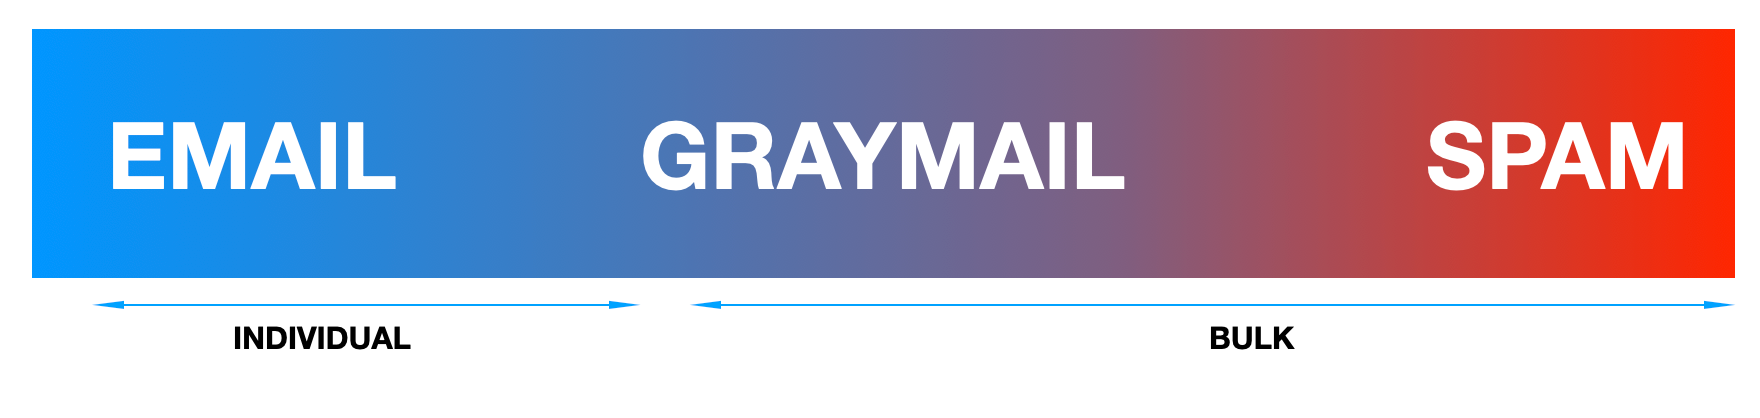 Email, graymail and spam on a spectrum.